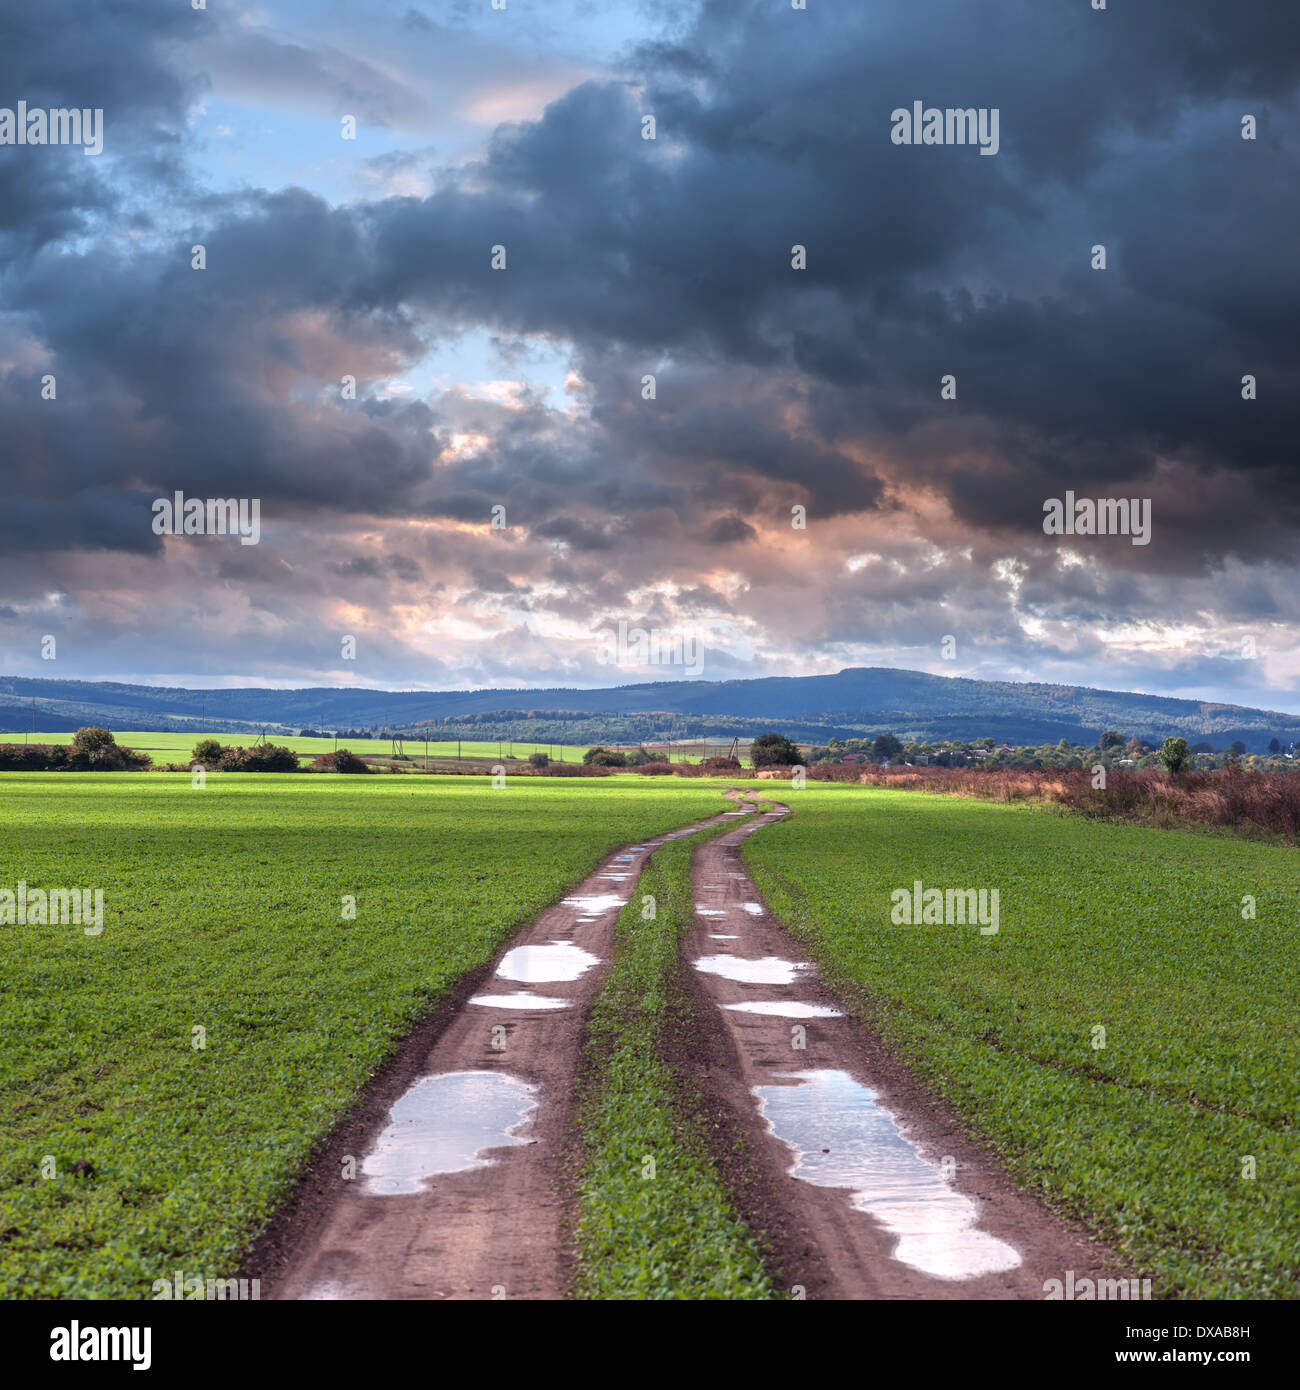 road, field and cloudy sky Stock Photo